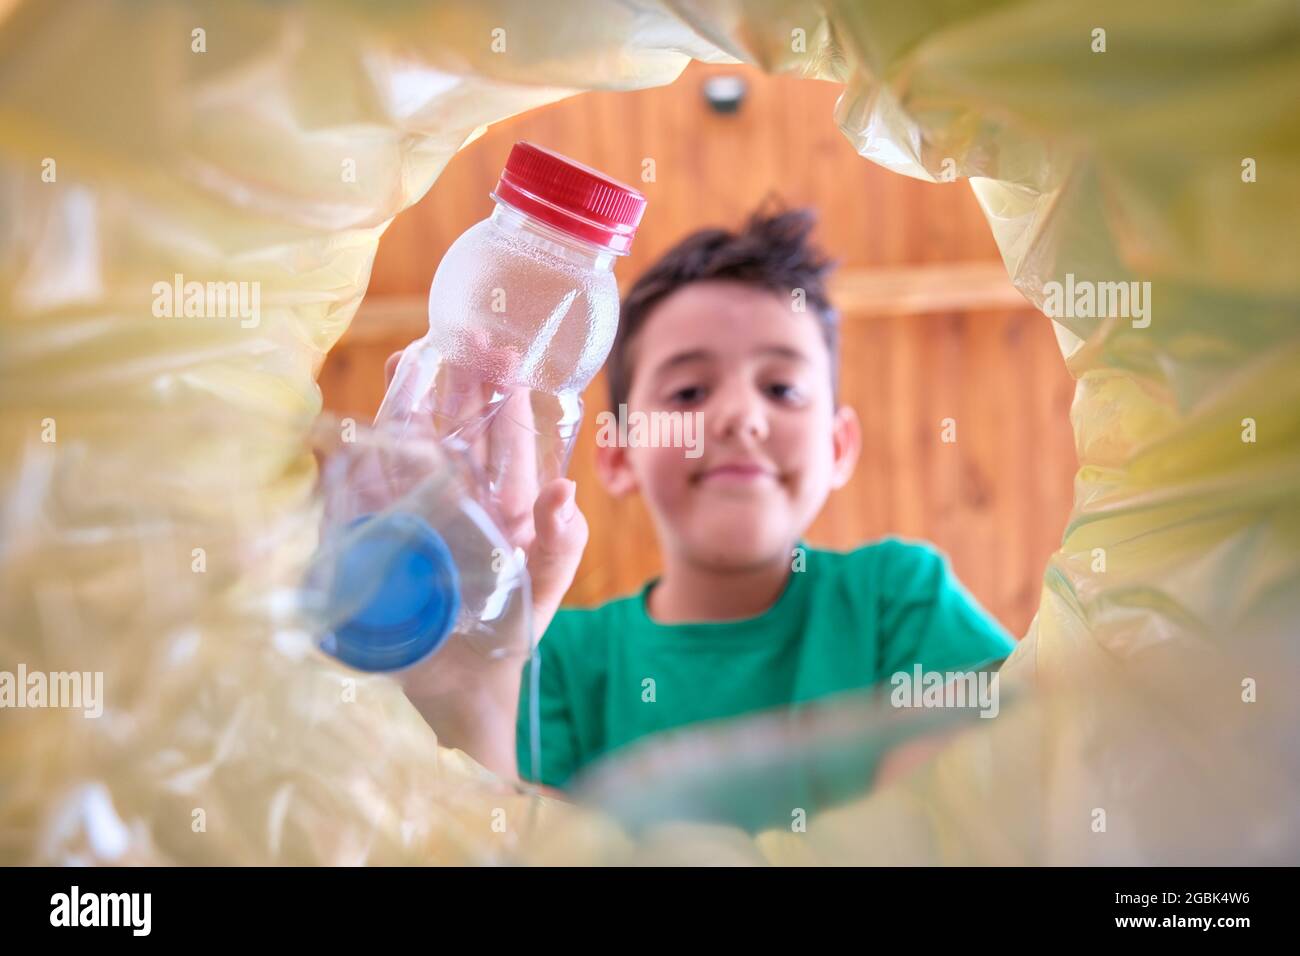 image from inside a recycling bin with a yellow bag of a child throwing a plastic bottle to recycle in which the child's face is out of focus Stock Photo